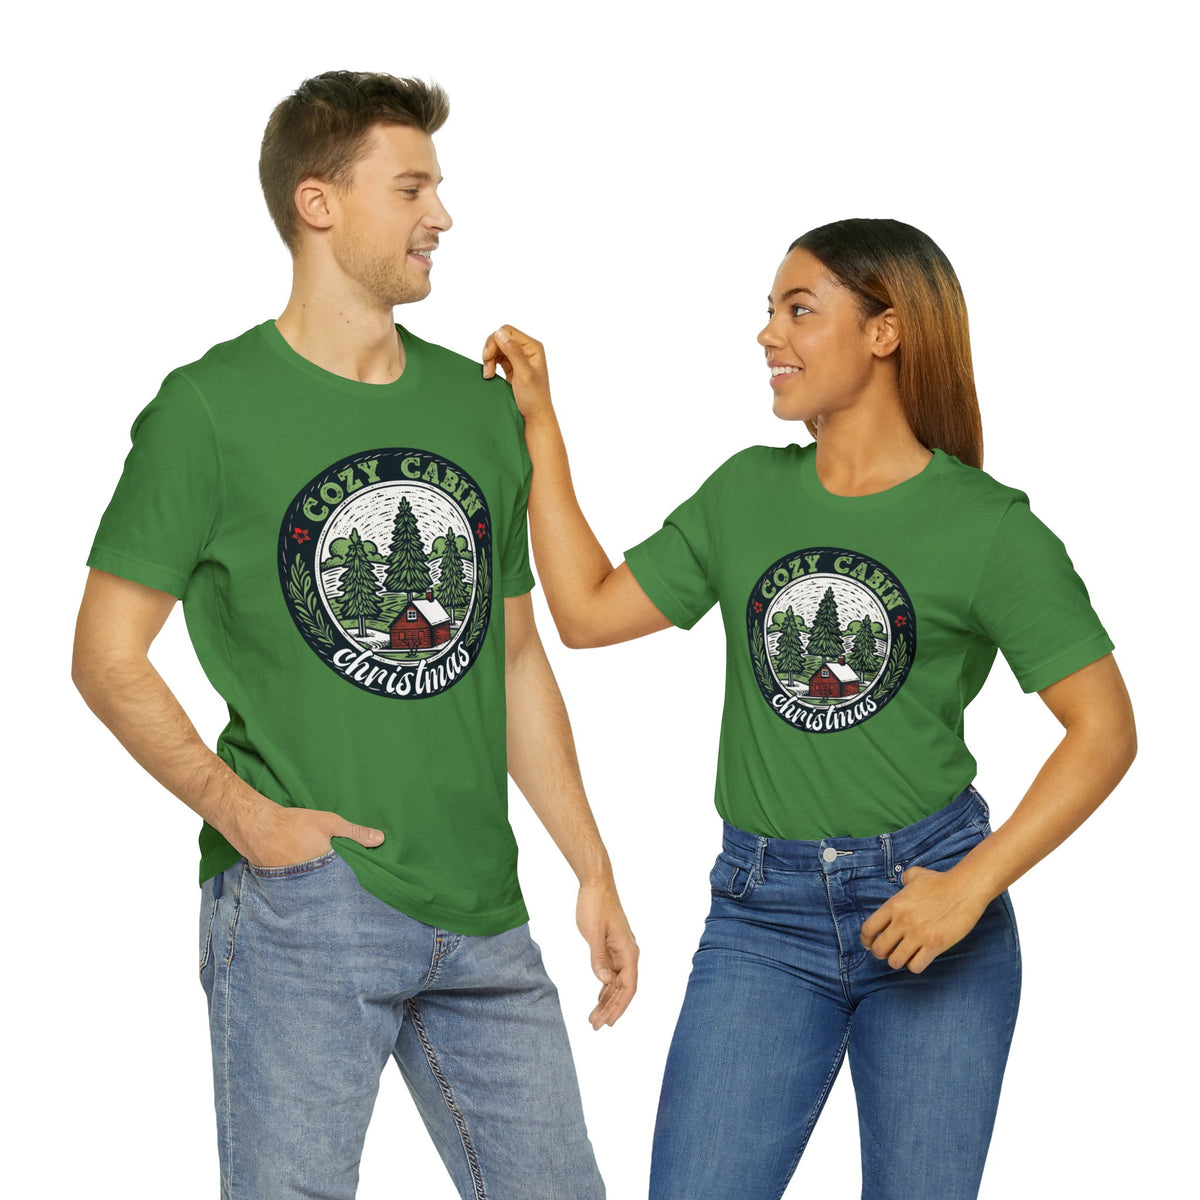 Cozy Cabin Christmas Tree Shirt | Vintage Christmas Gift For Her | Unisex Jersey T-shirt